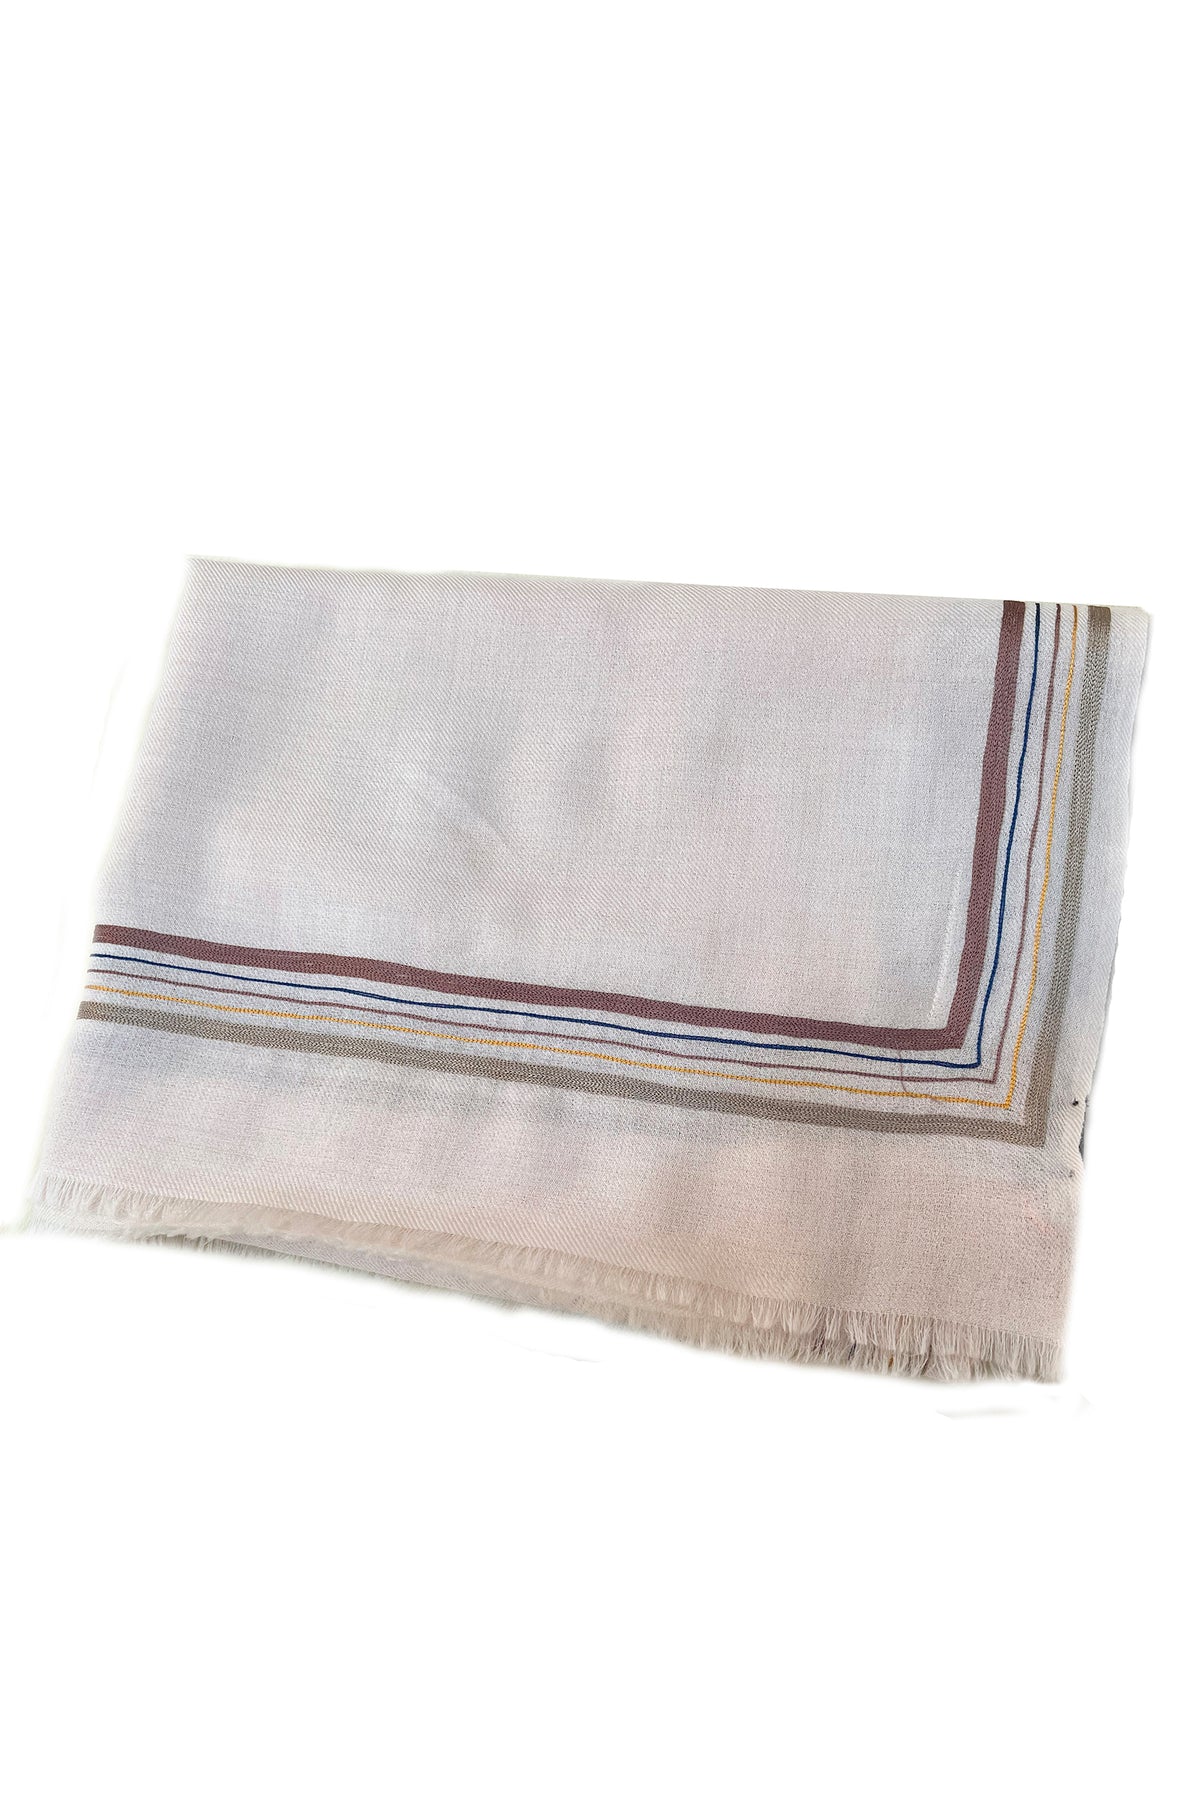 Buy Embroidered Fine Wool Silk Stole